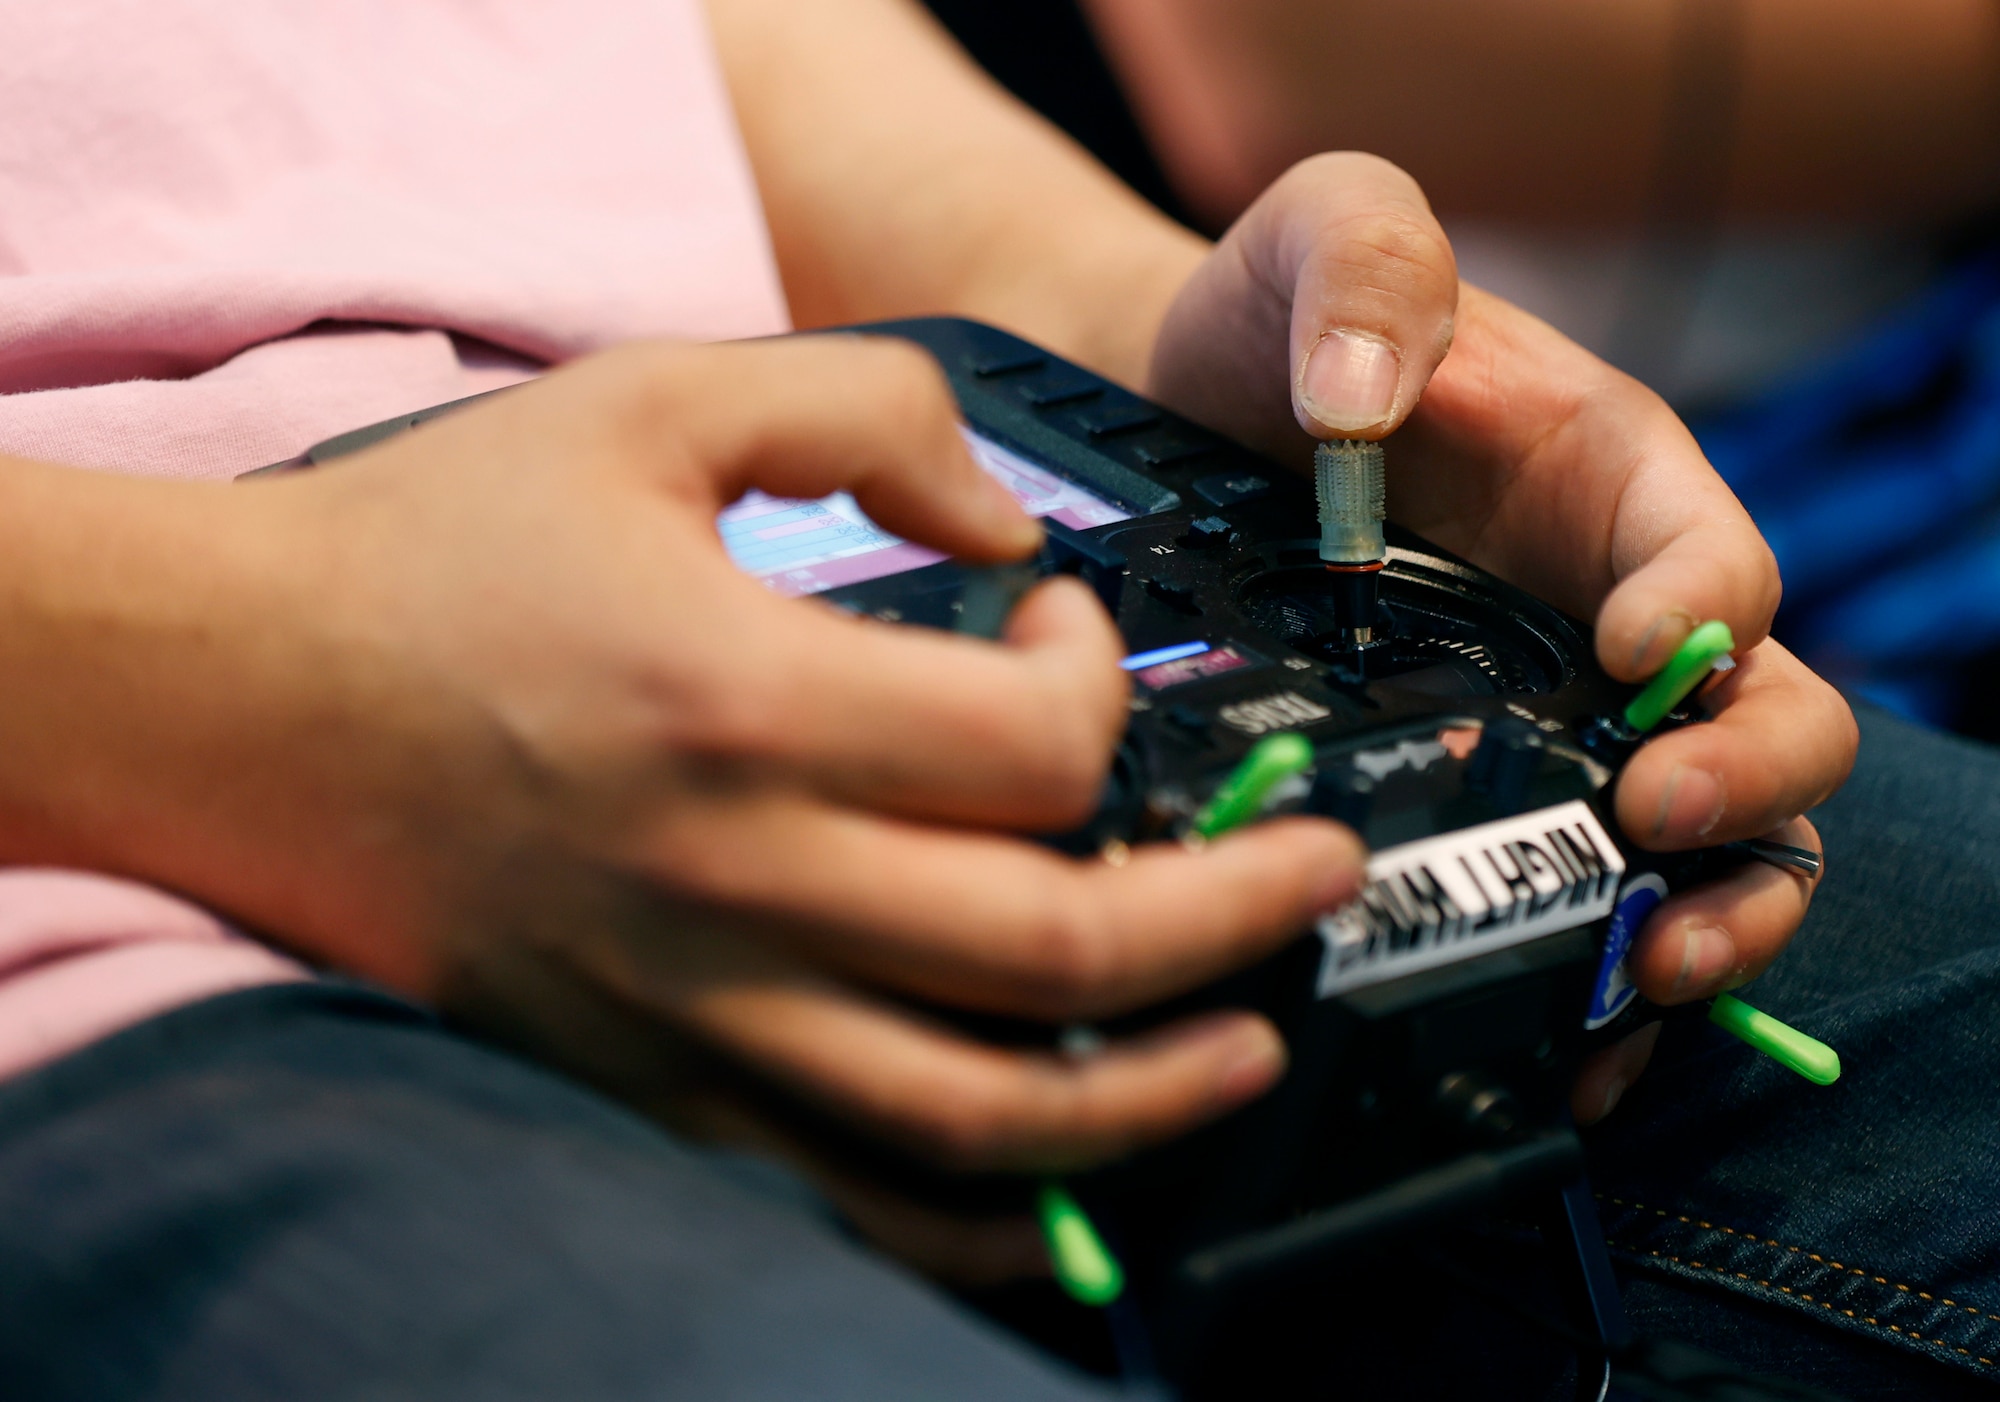 Image of hands on a gaming control